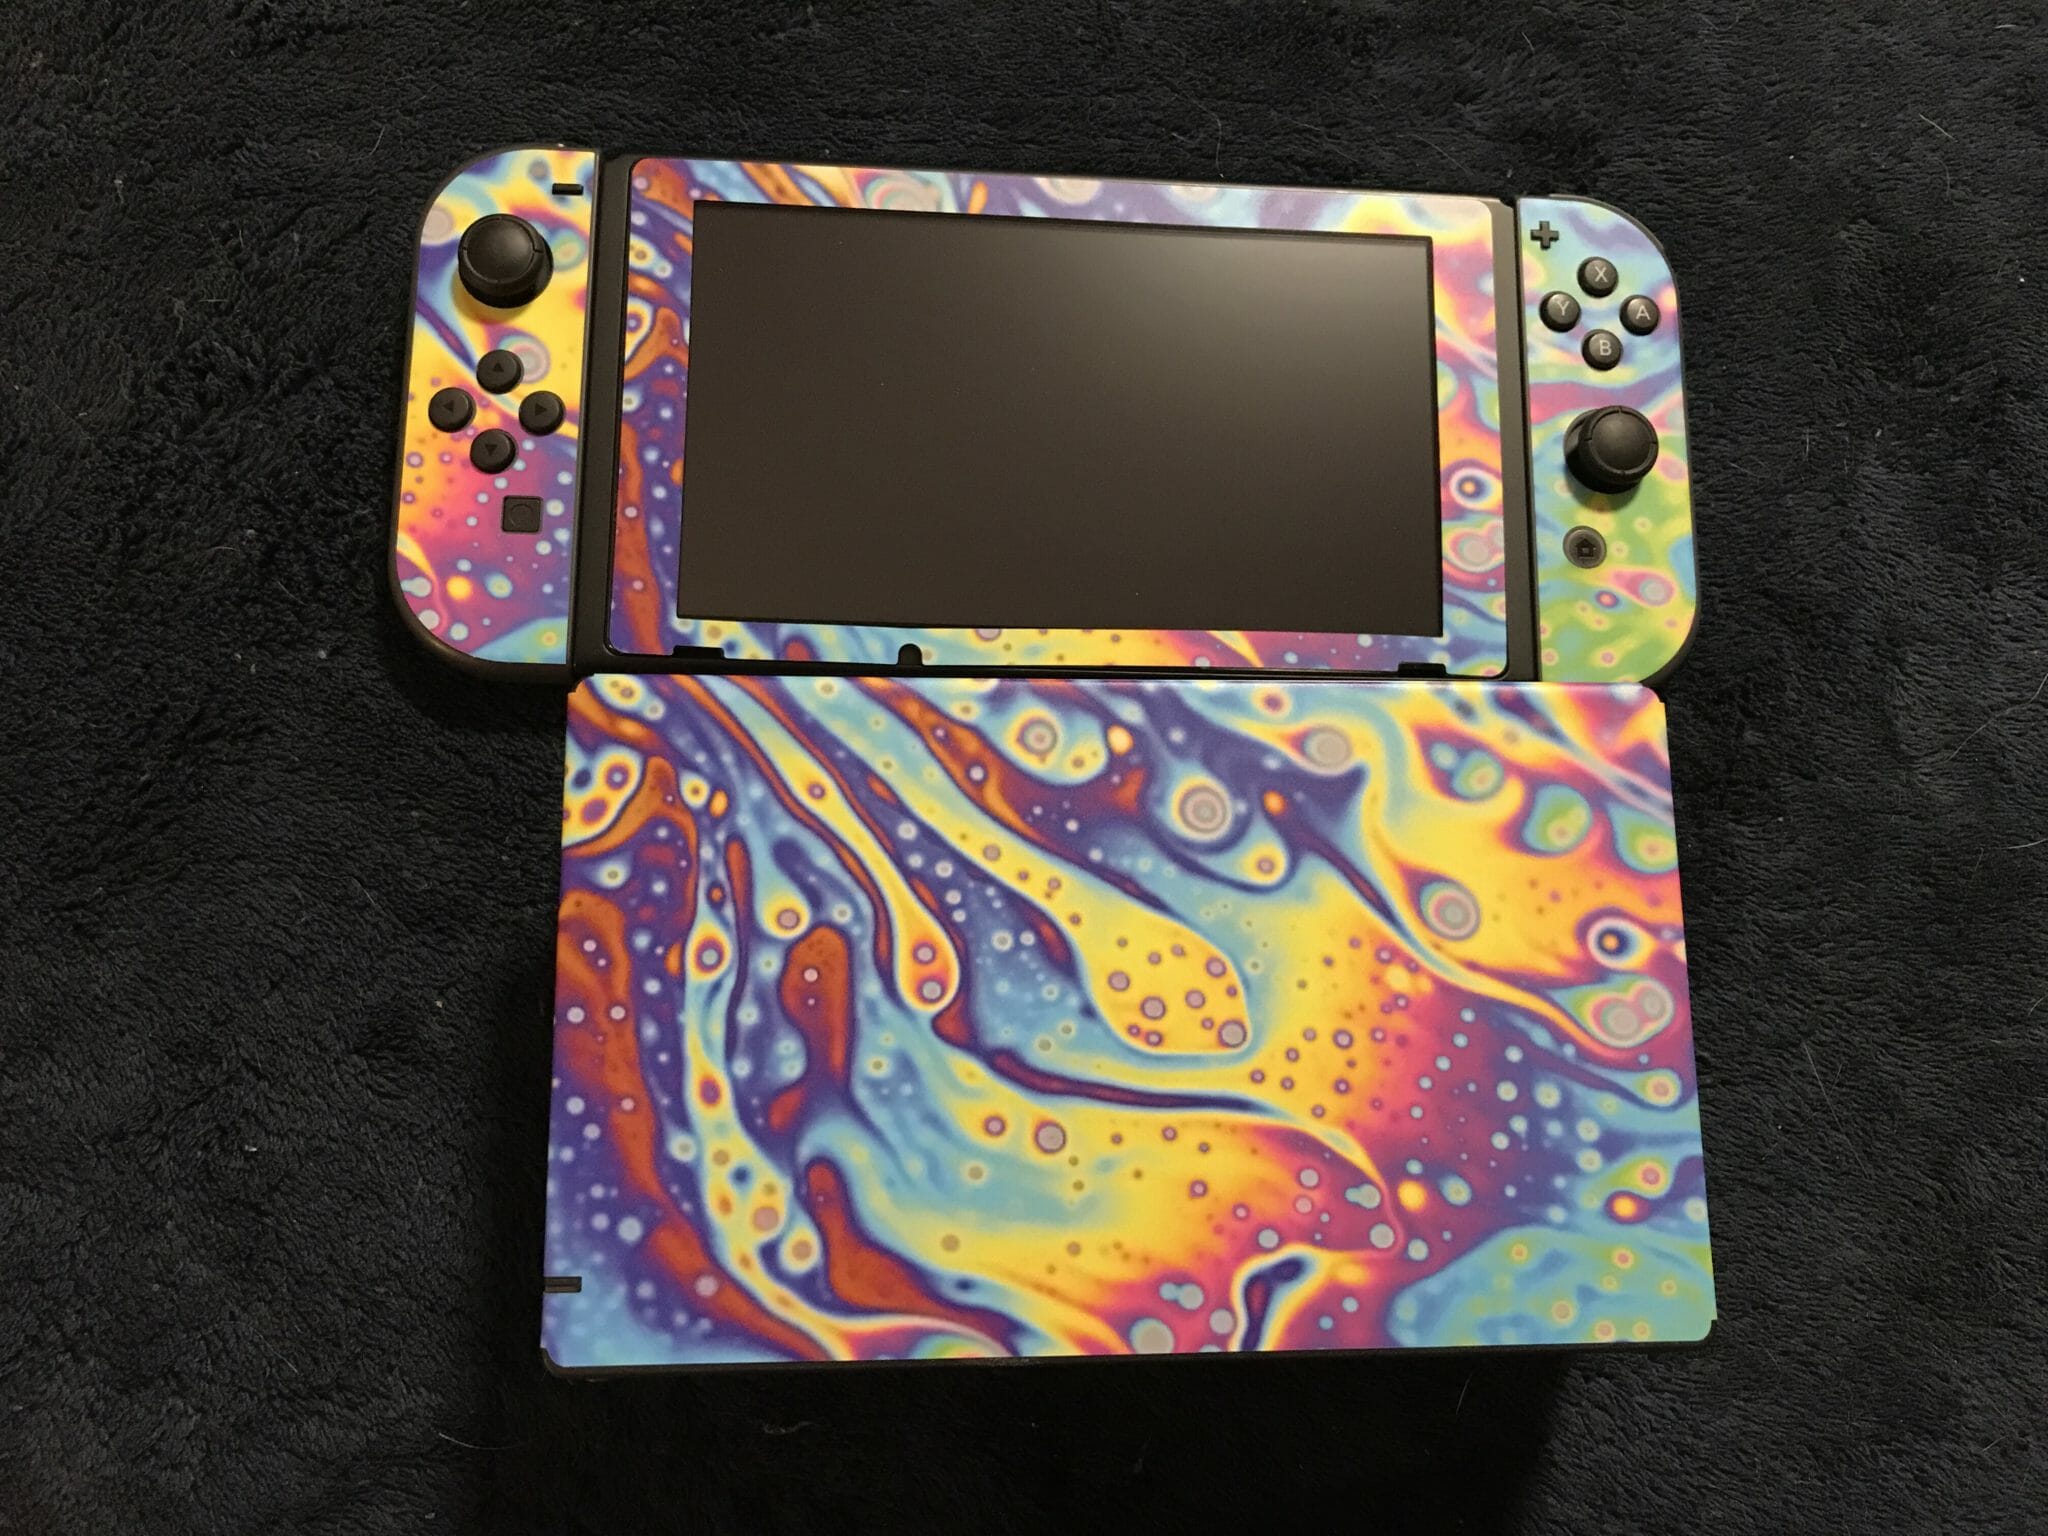 A Nintendo Switch with a very colorful soap-bubble vinyl skin.